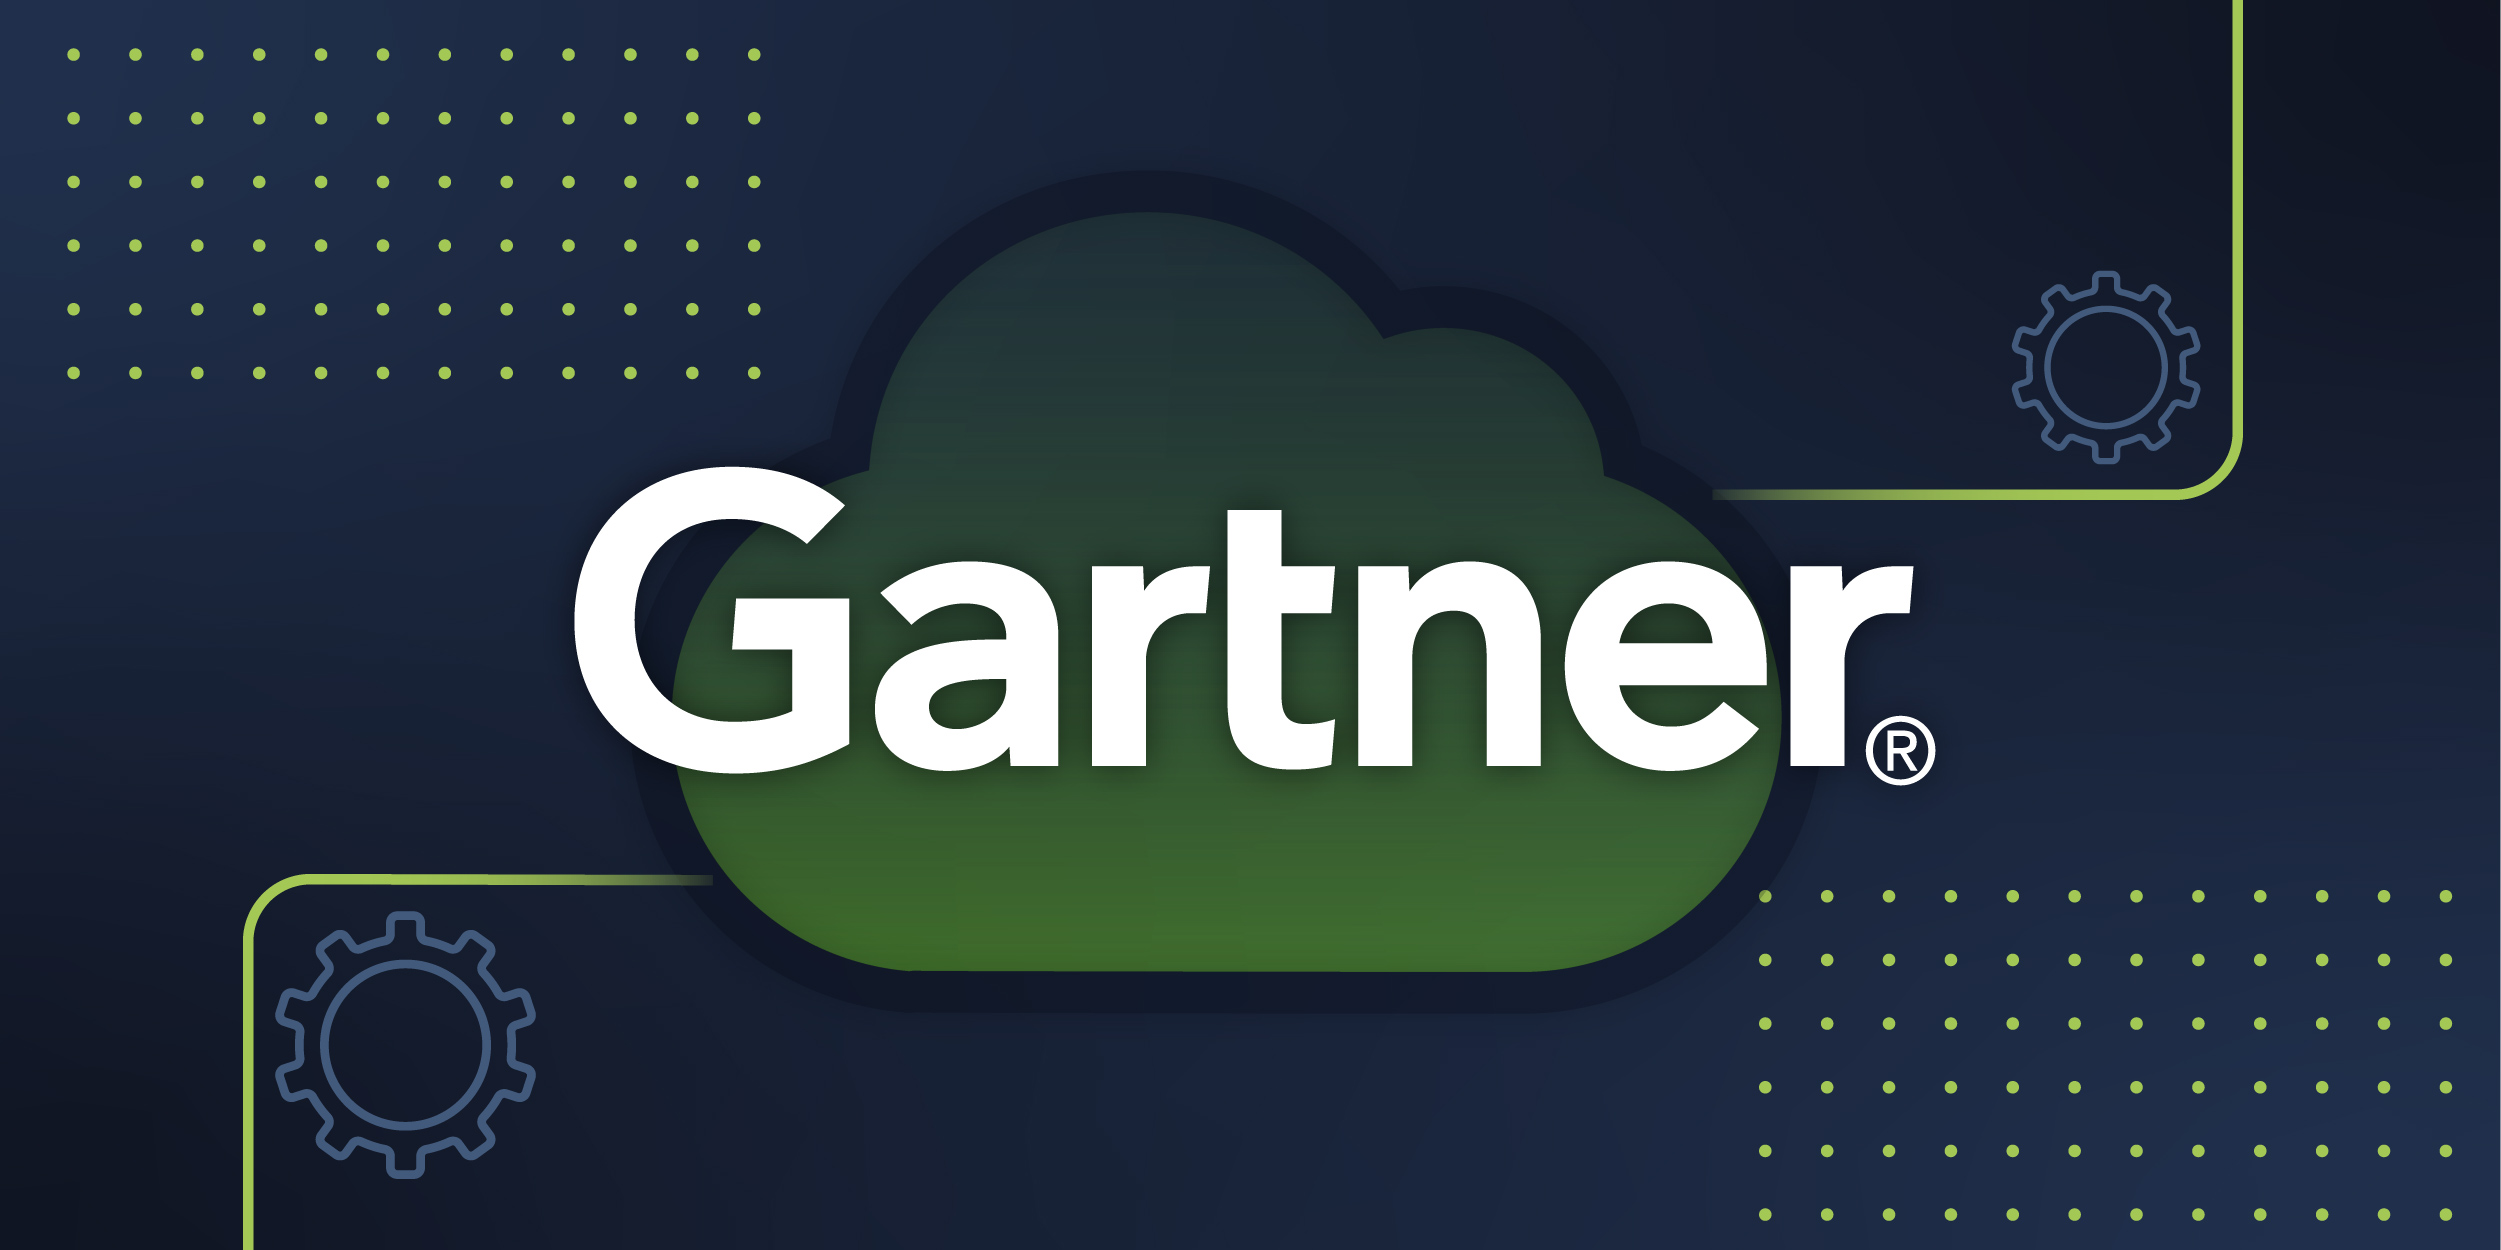 Key Network Automation Insights from the Gartner I&O Conference